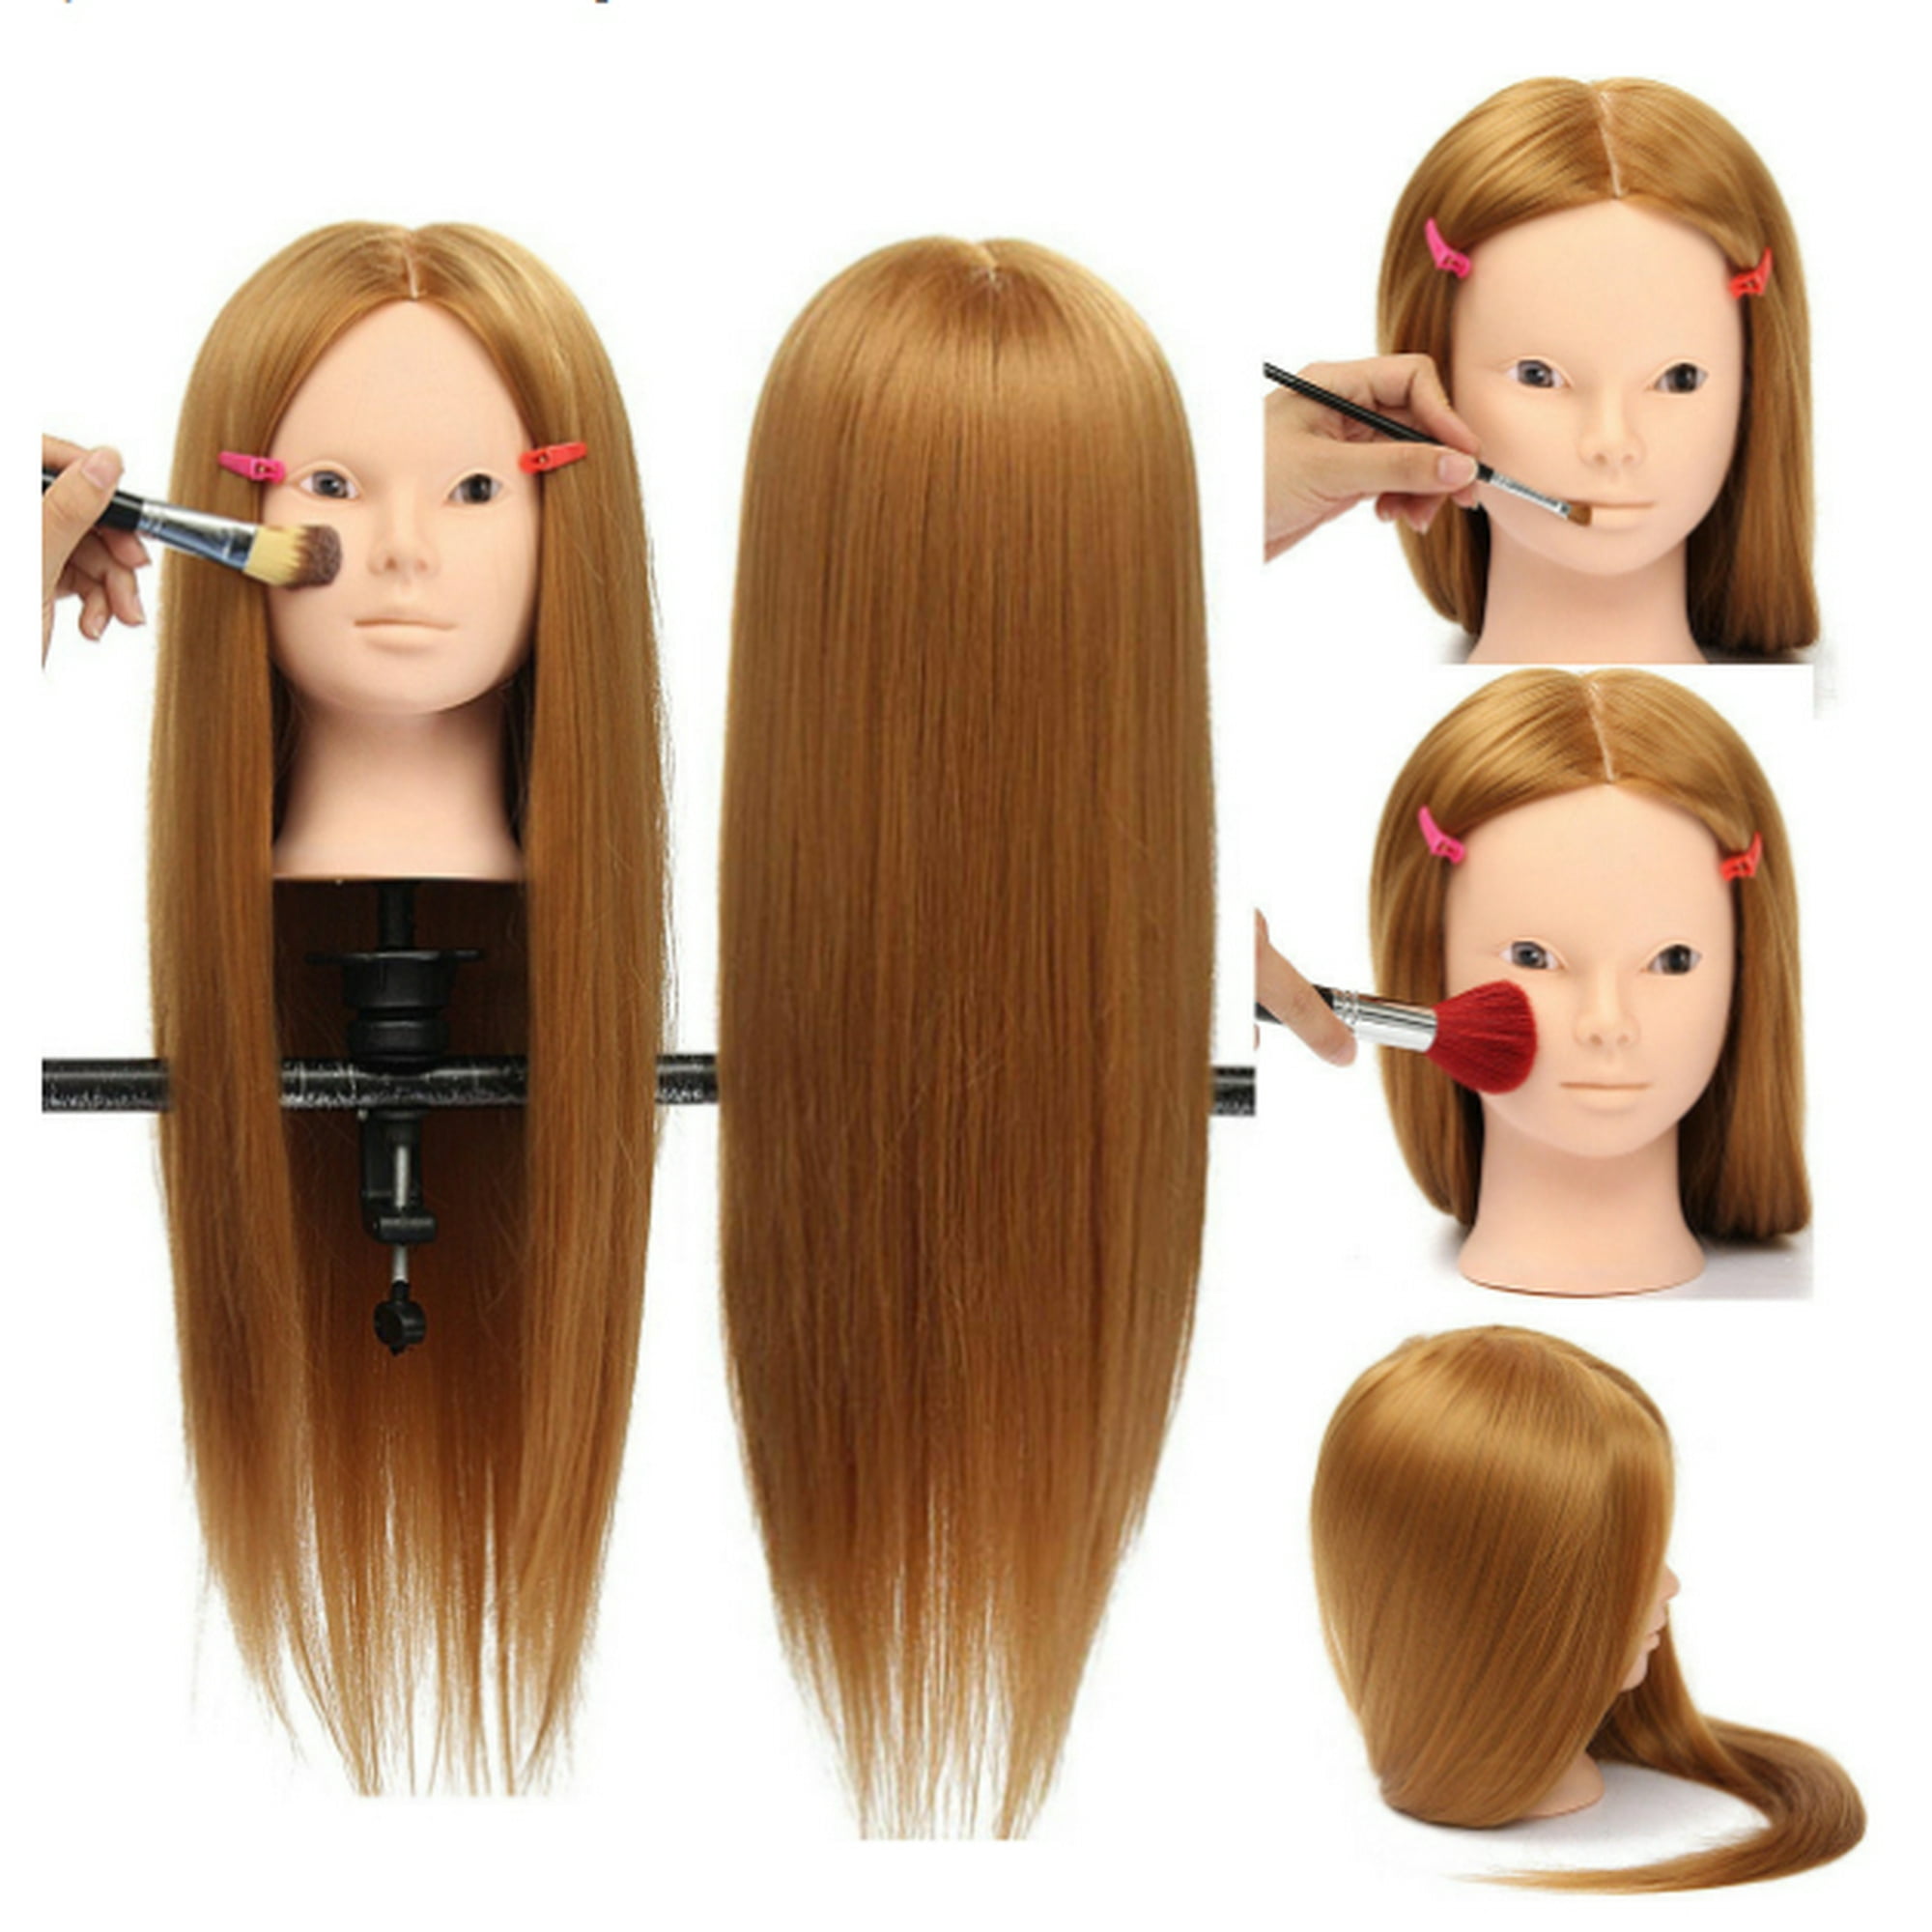 China Danser cassette 26”30% Real Hair Makeup Practice Training Head - Mannequin Head for Salon  Hairdressing Doll + Clamp | Walmart Canada